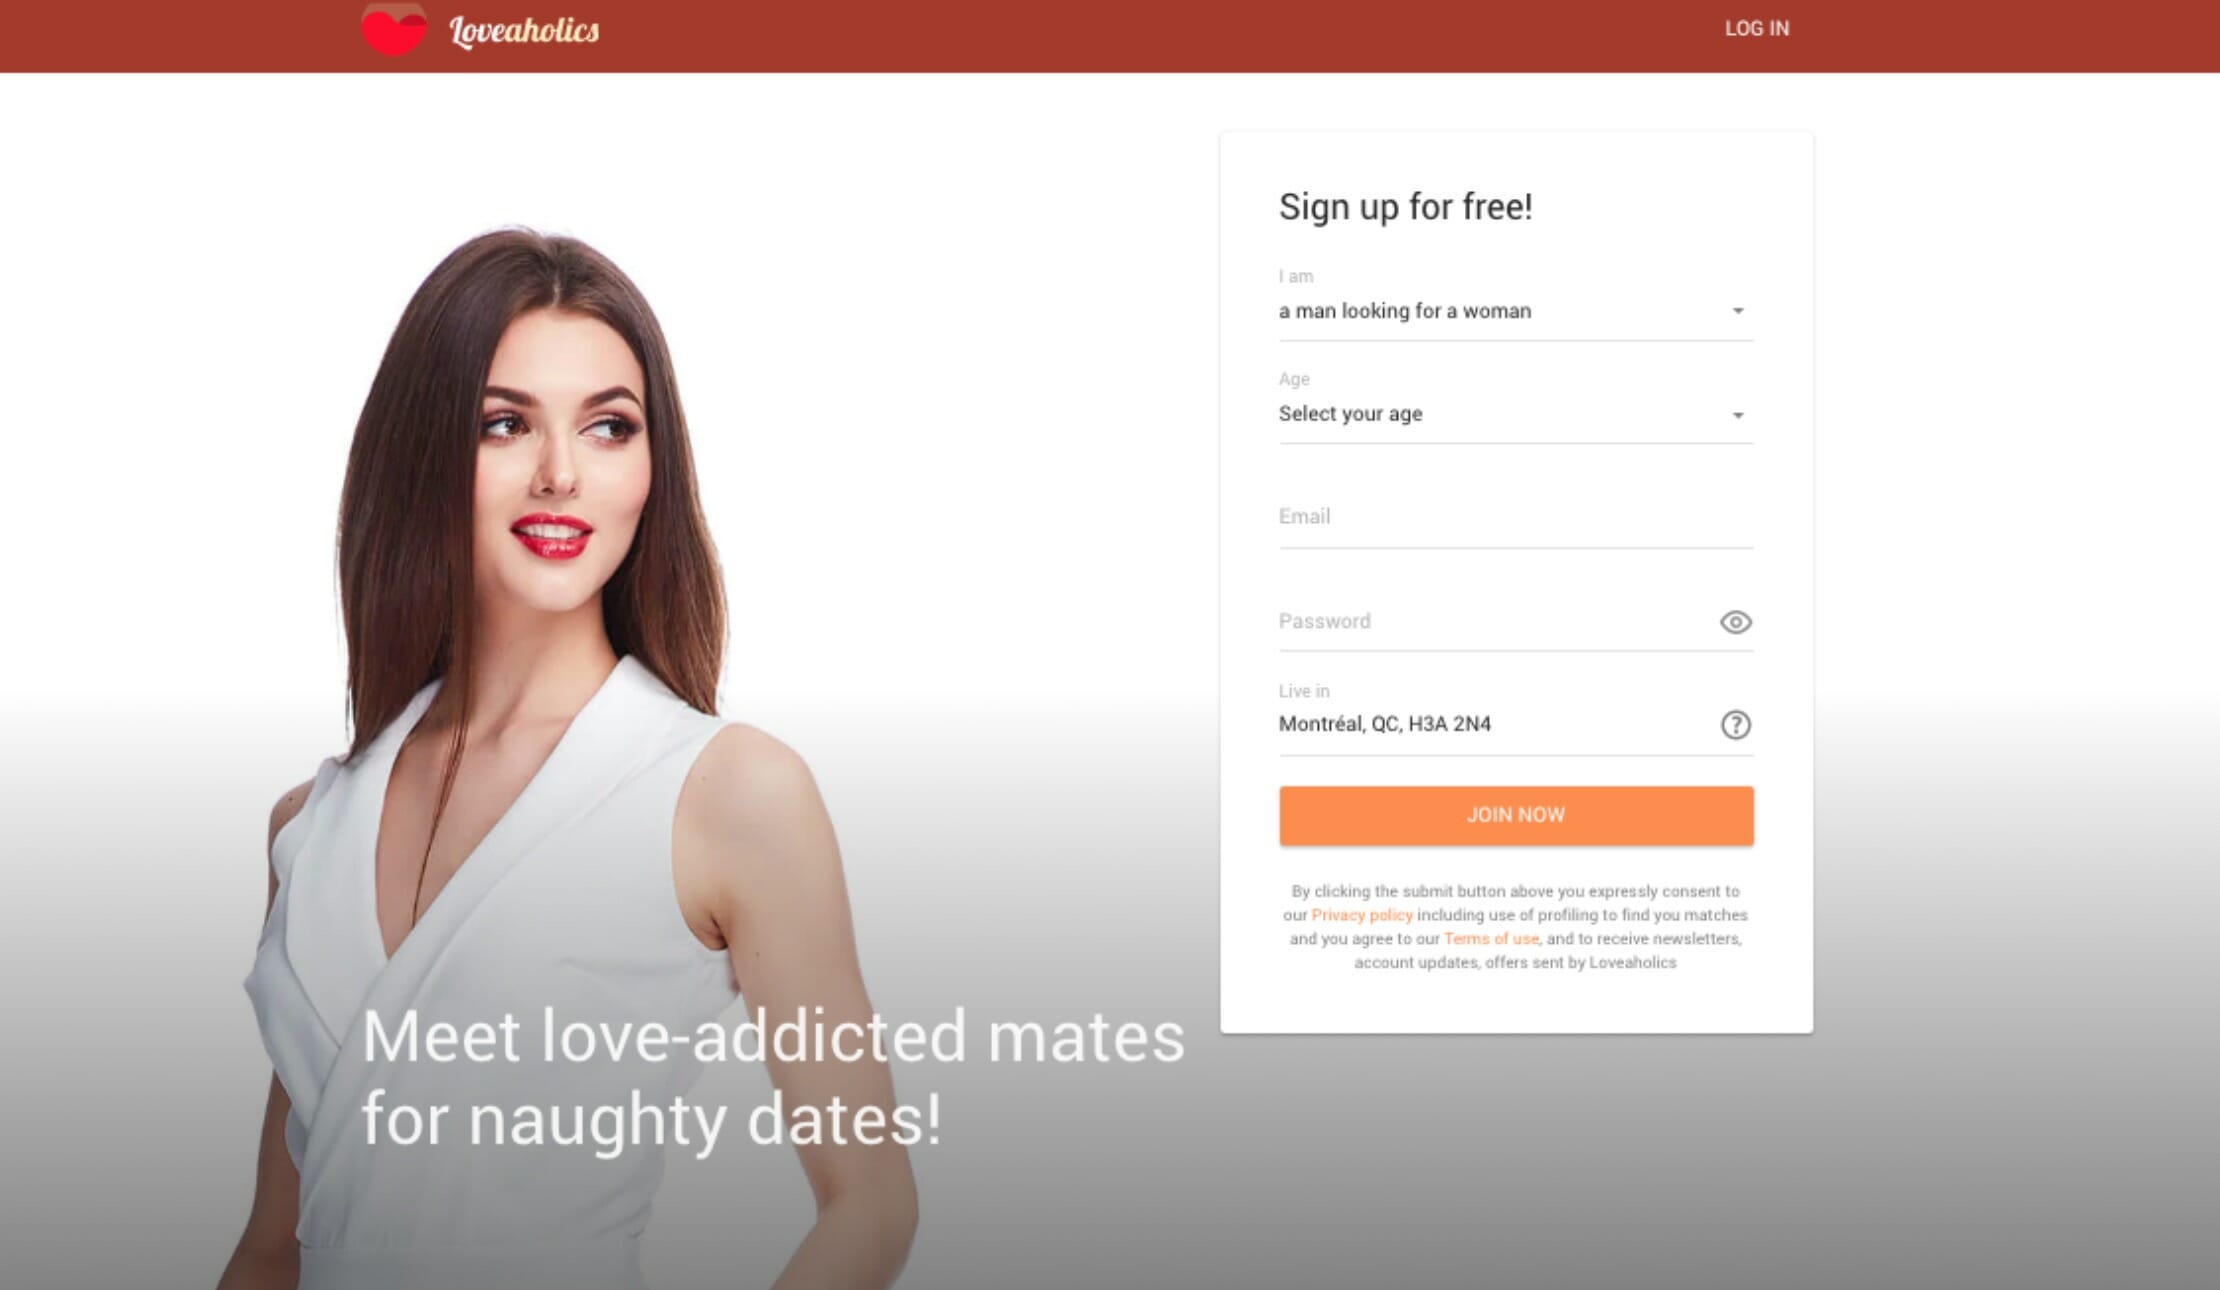 Top 10 best dating sites in Nigeria 2020: some are for free